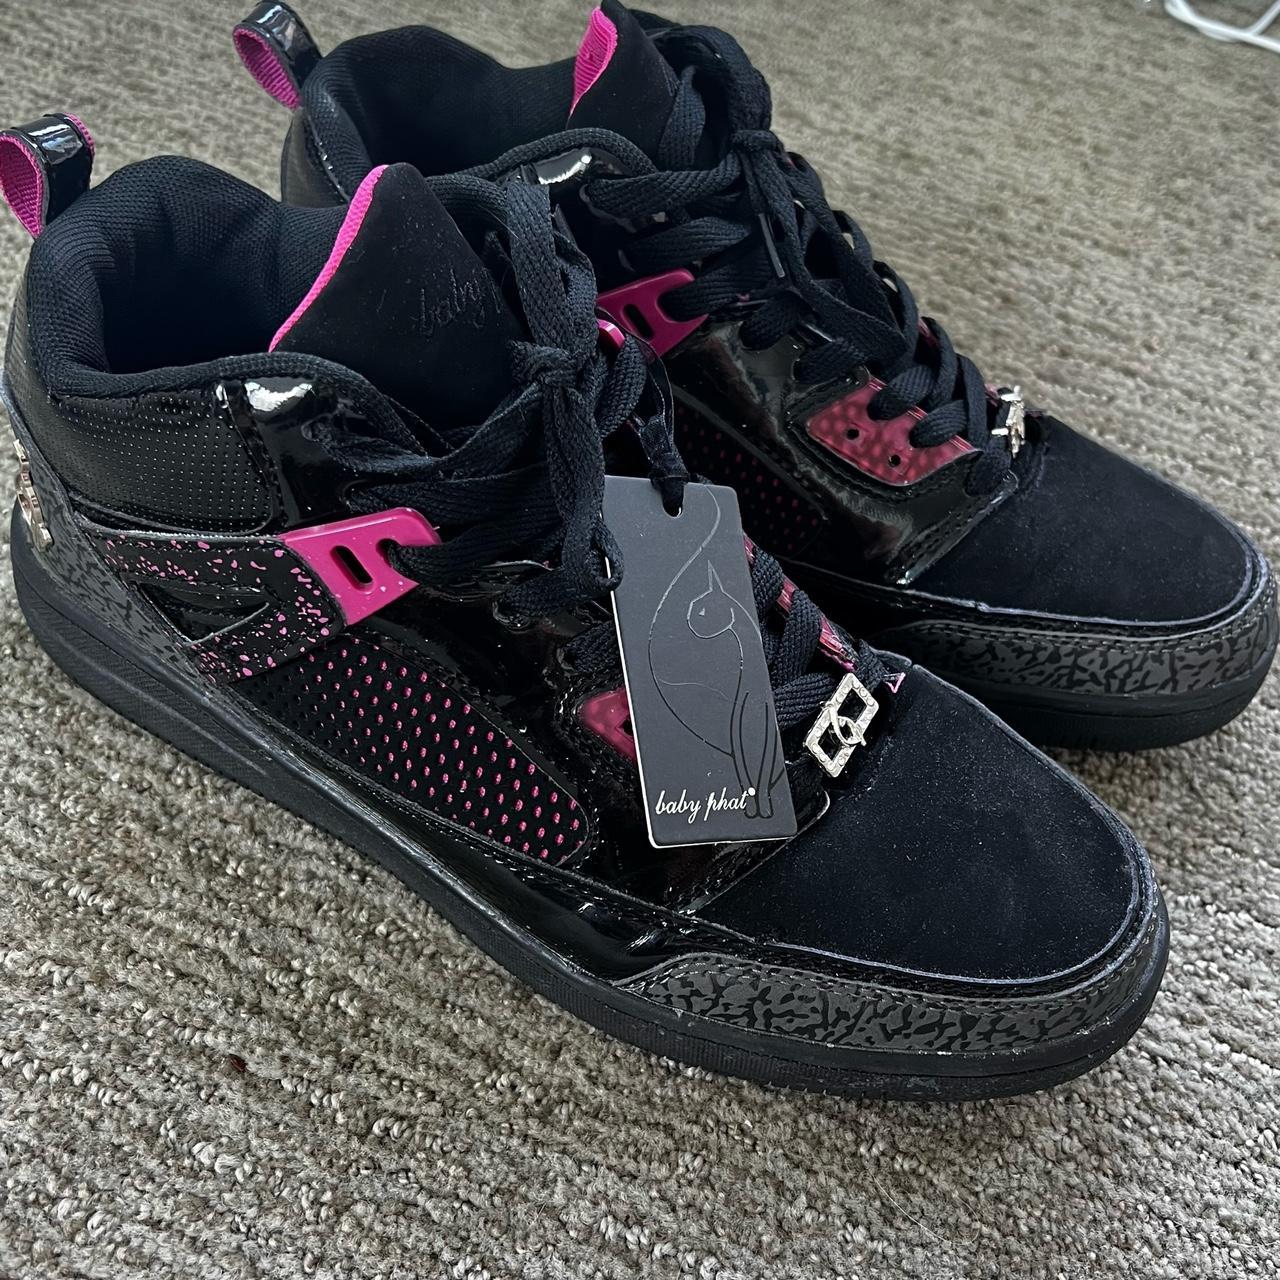 Svaghed Aftale tør Baby Phat Women's Black and Pink Trainers | Depop